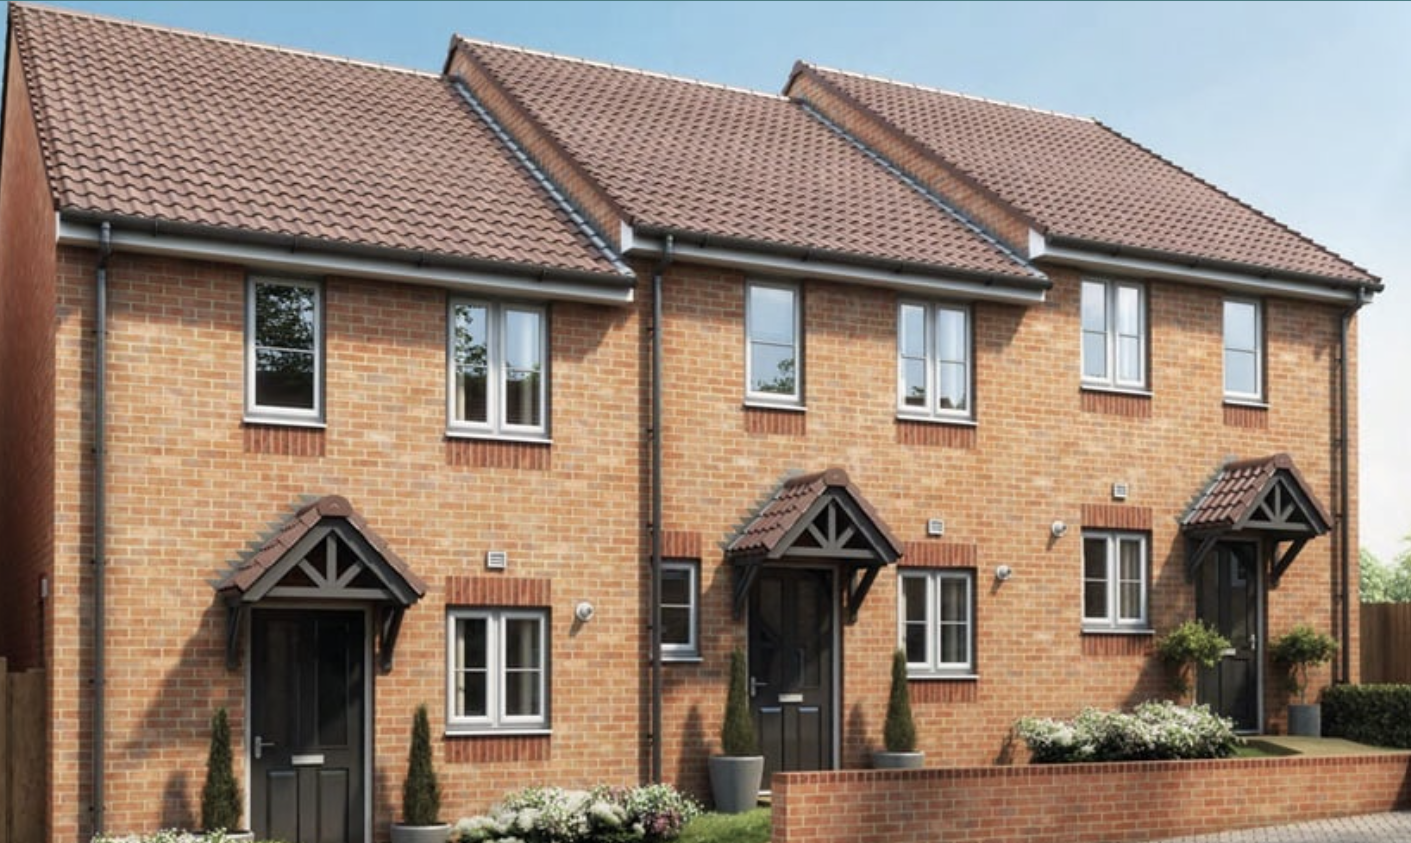 Our stunning development of 2, 3, 4 and 5 bedroom homes, Appledown Gate, is situated in the beautiful village of Keresley, a suburban village and civil parish in the City of Coventry.